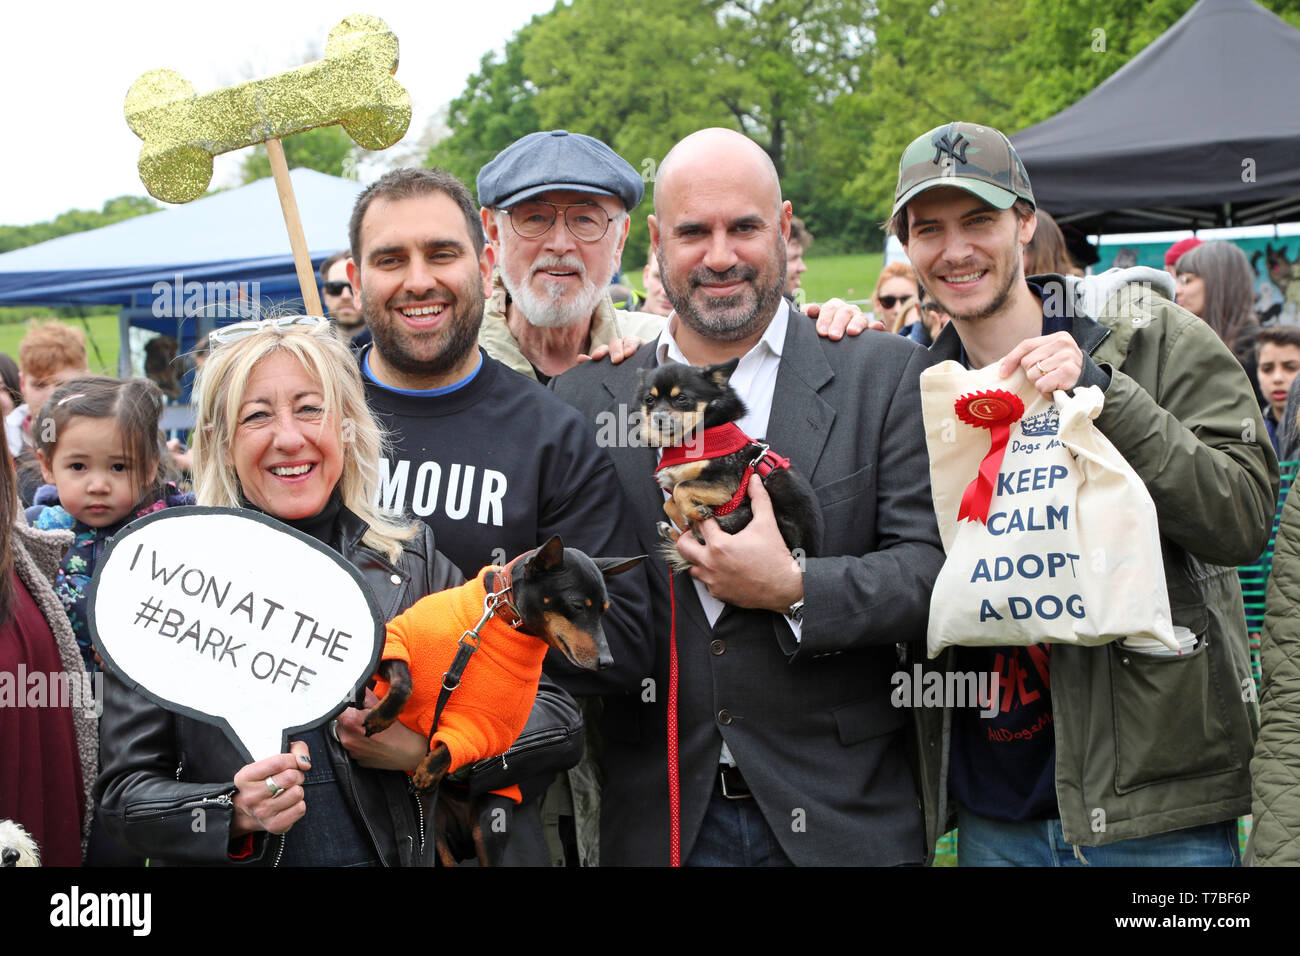 London, UK. 5th May 2019. Judges Anna Webb, Peter Egan and Marc Abraham, with Zoe the Pomchi and owner Harry, winners of the best rescue dog category (Zoe was rescued from New Mexico) at the All Dogs Matter Bark Off charity dog show, Hampstead Heath, London, England. Cute dogs took part in several categories of this annual dog show which is run by the charity which houses and rehomes dogs in London and finds homes for dogs from overseas. Dogs competed to be cutest pup, best rescue and more. More information at www.alldogsmatter.co.uk Credit: Paul Brown/Alamy Live News Stock Photo